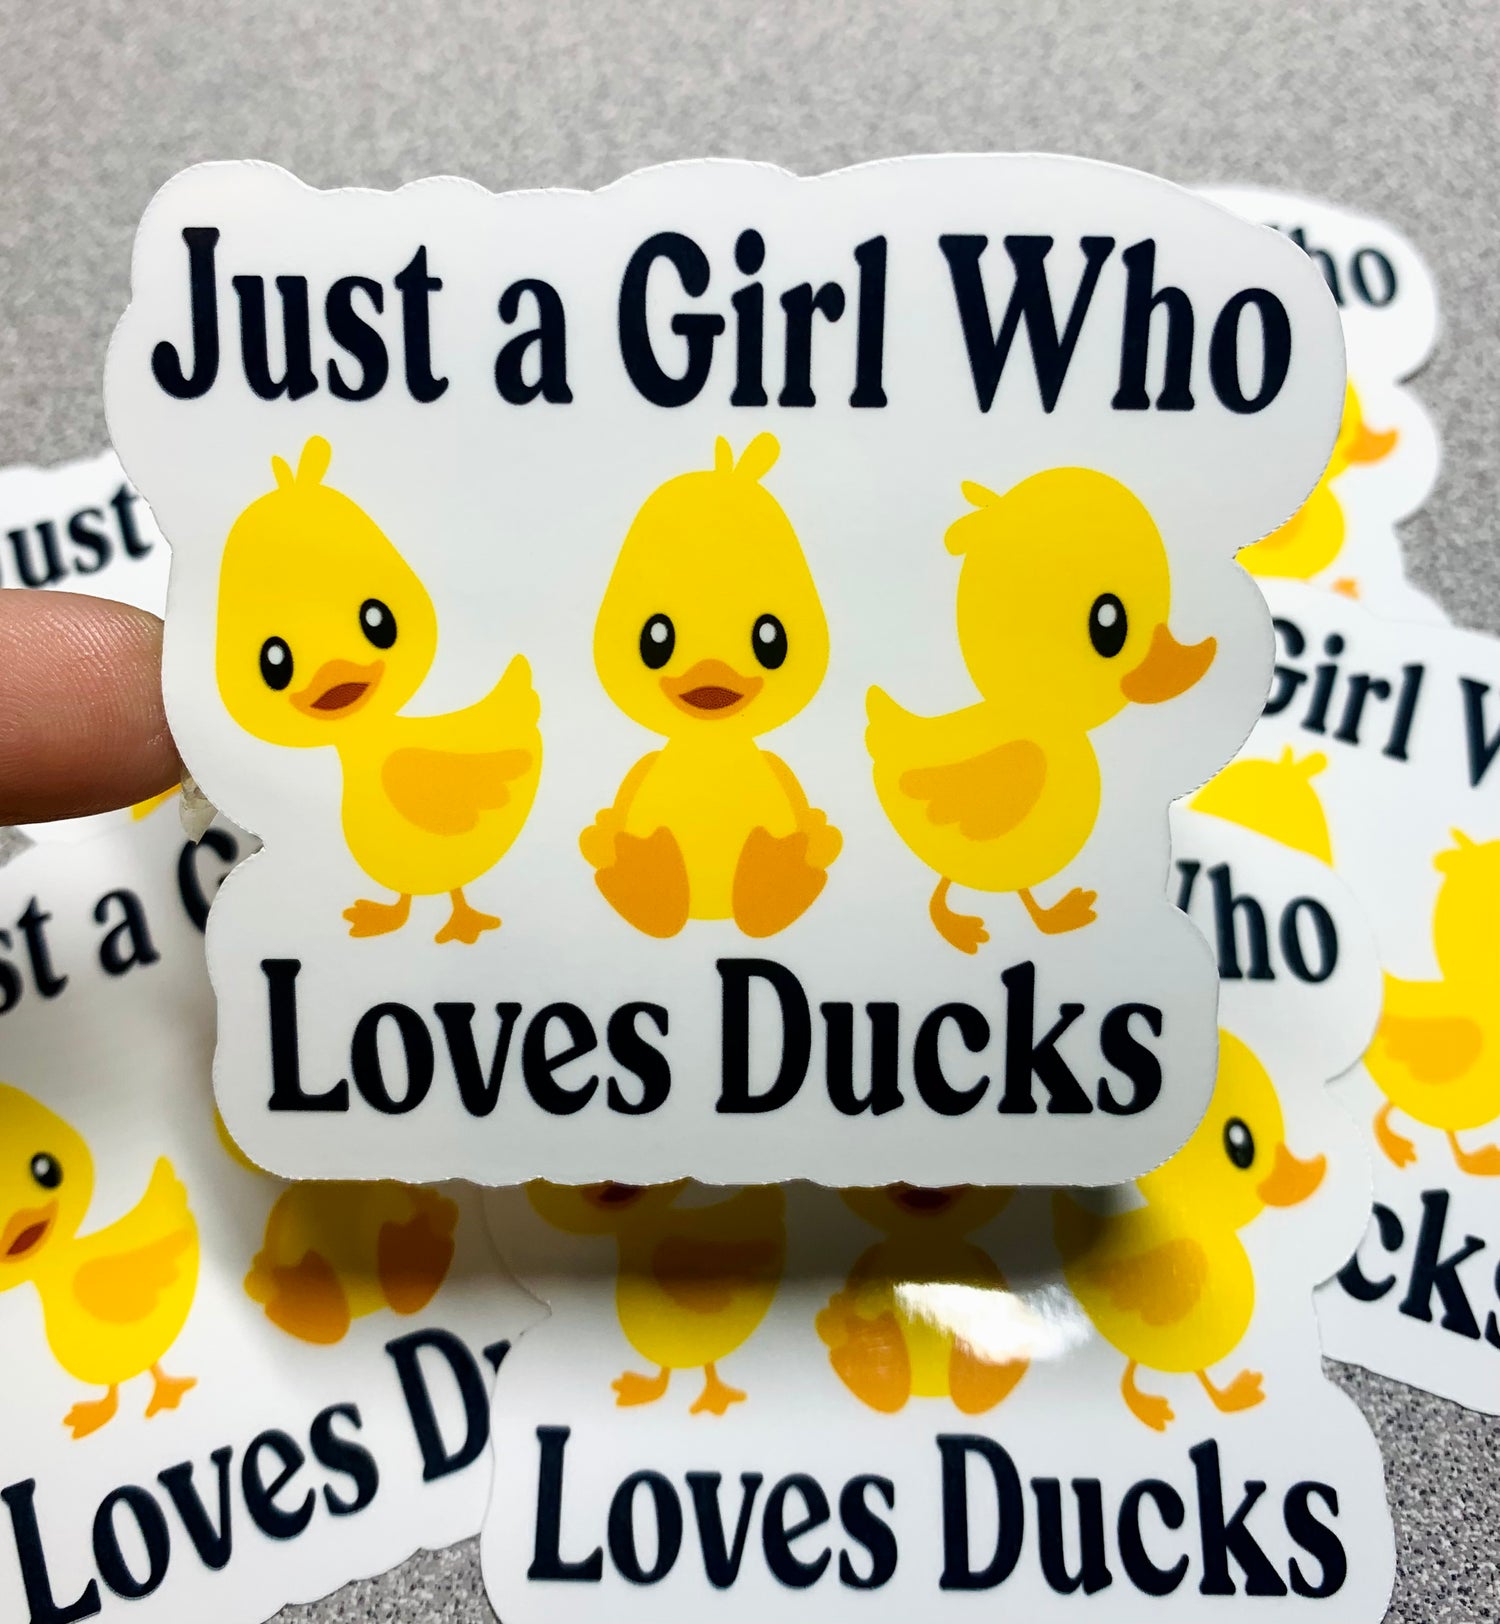 Just a Girl Who Loves Ducks Vinyl Sticker Decal - Scent Tree Studio